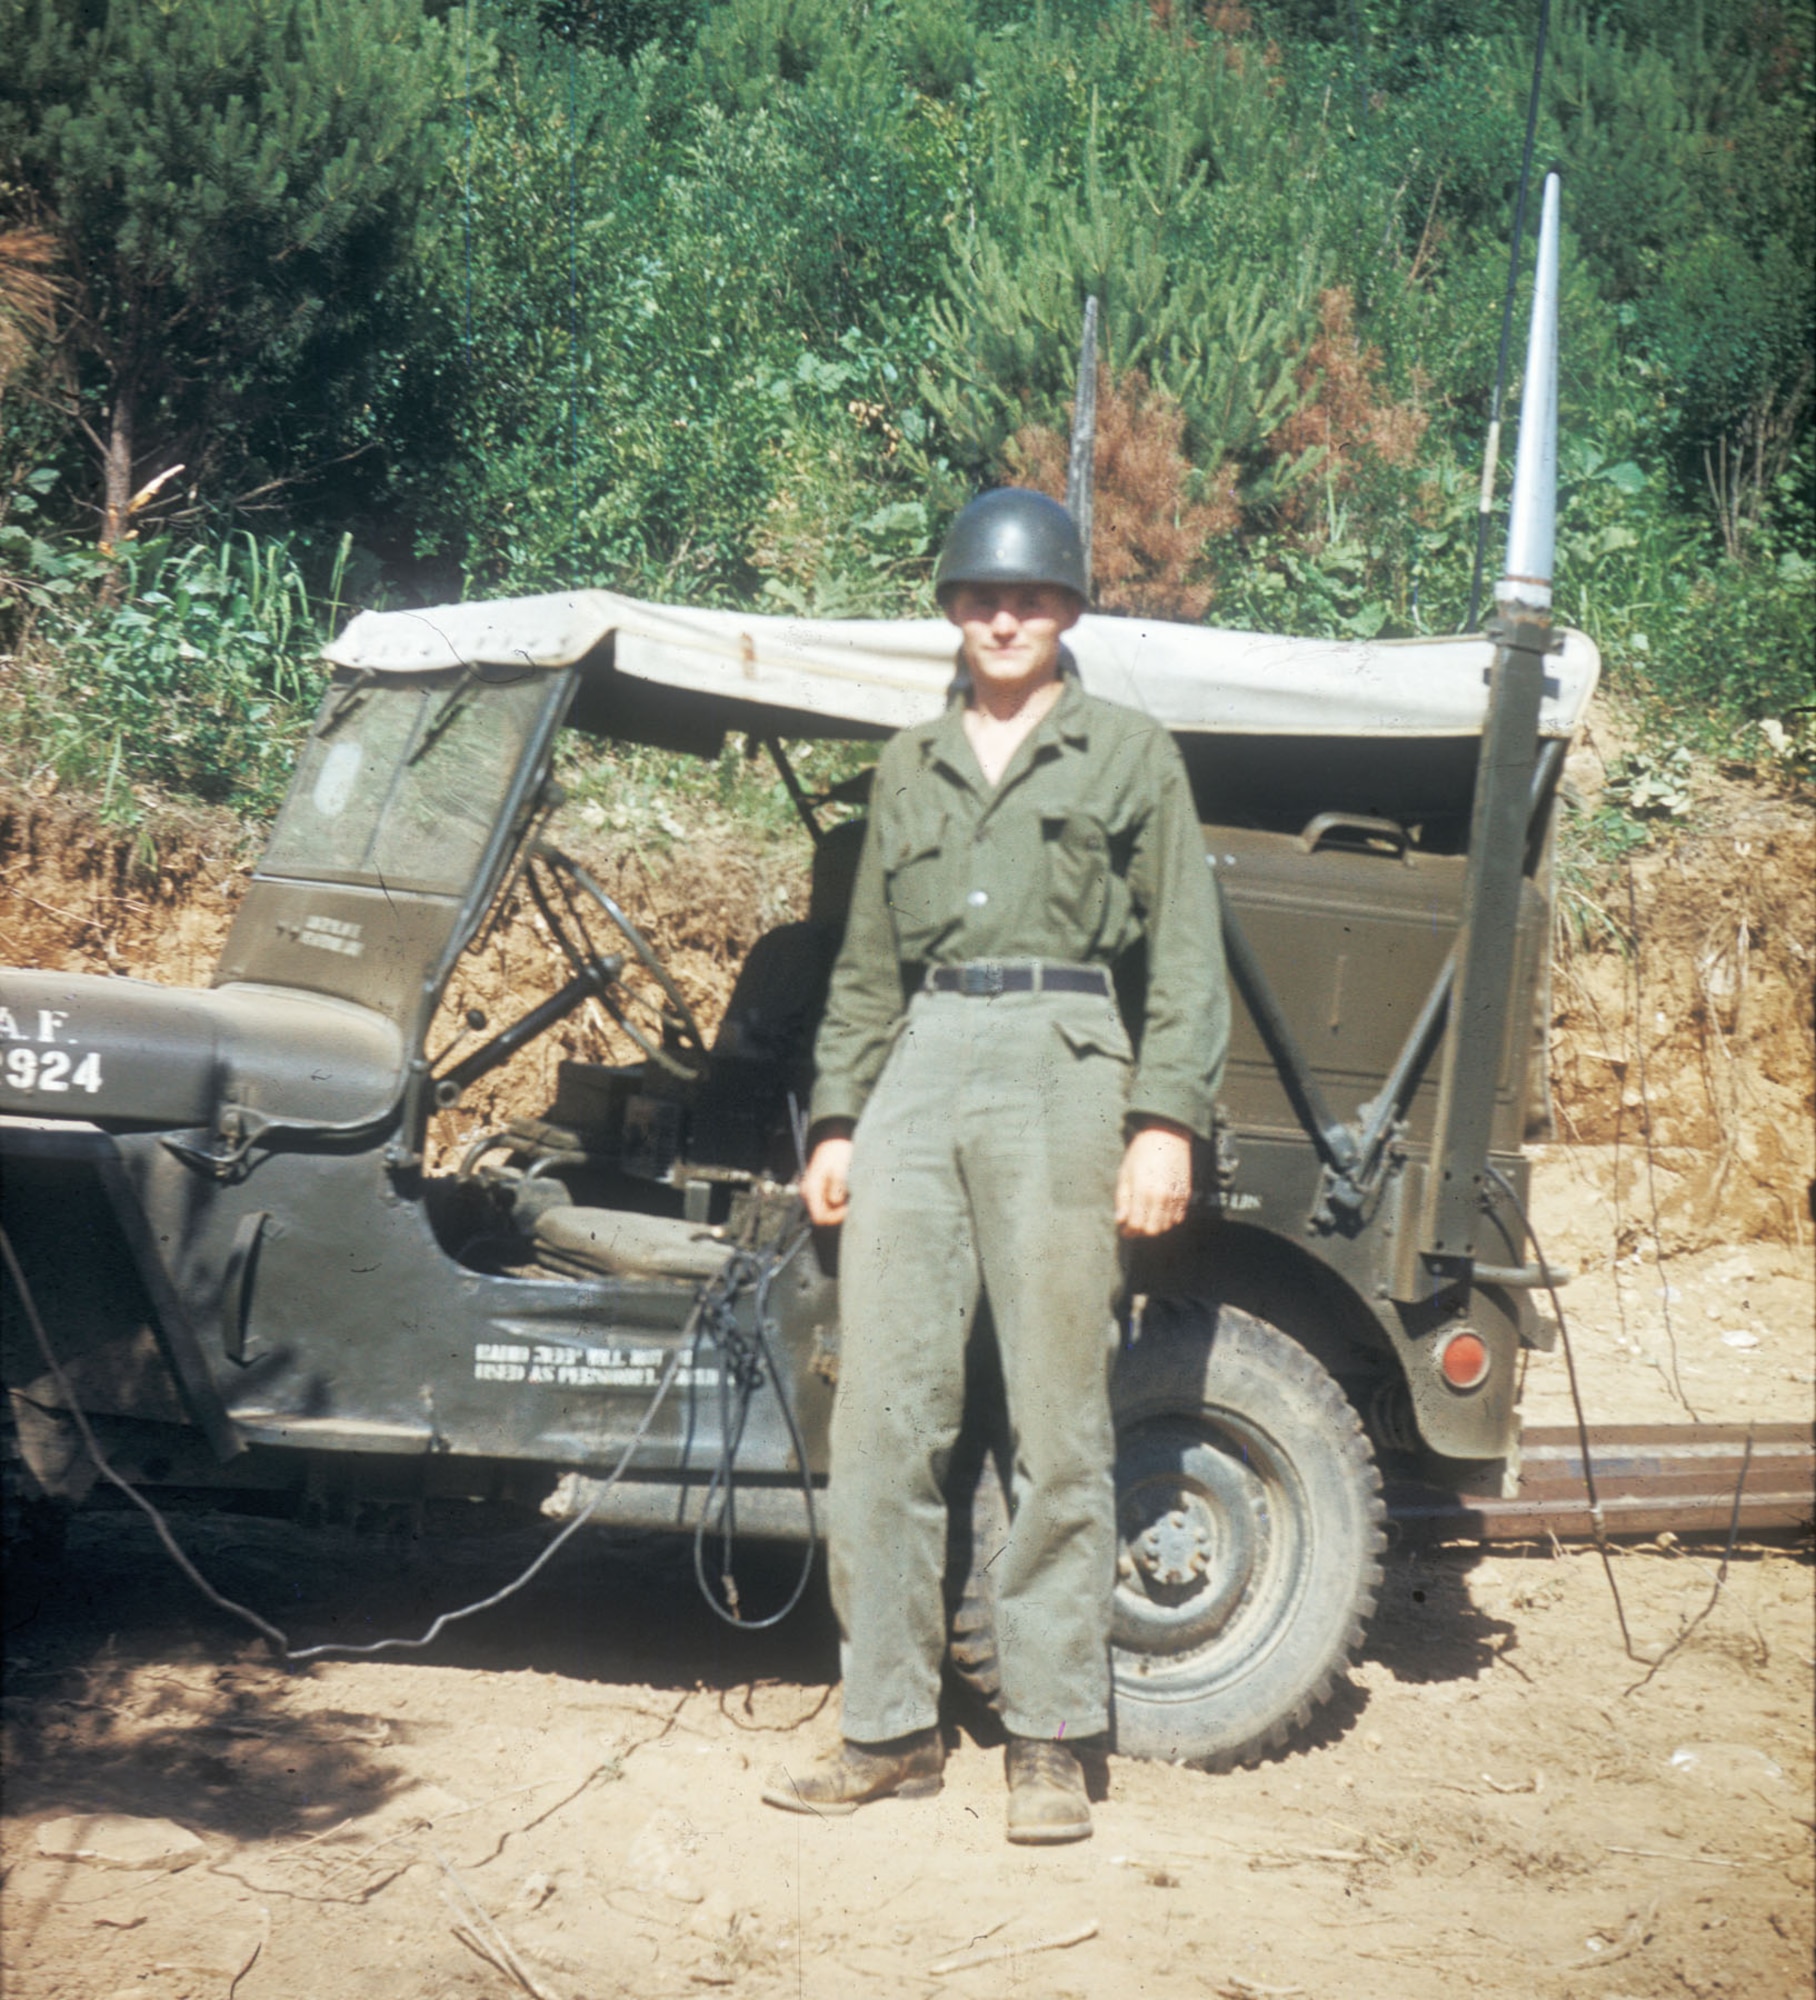 USAF Tactical Air Control Party (TACP) radioman with his jeep at the front lines in 1952. Air Force radio jeeps were easily identified by the large silver antennae protruding above the roof. (U.S. Air Force photo)